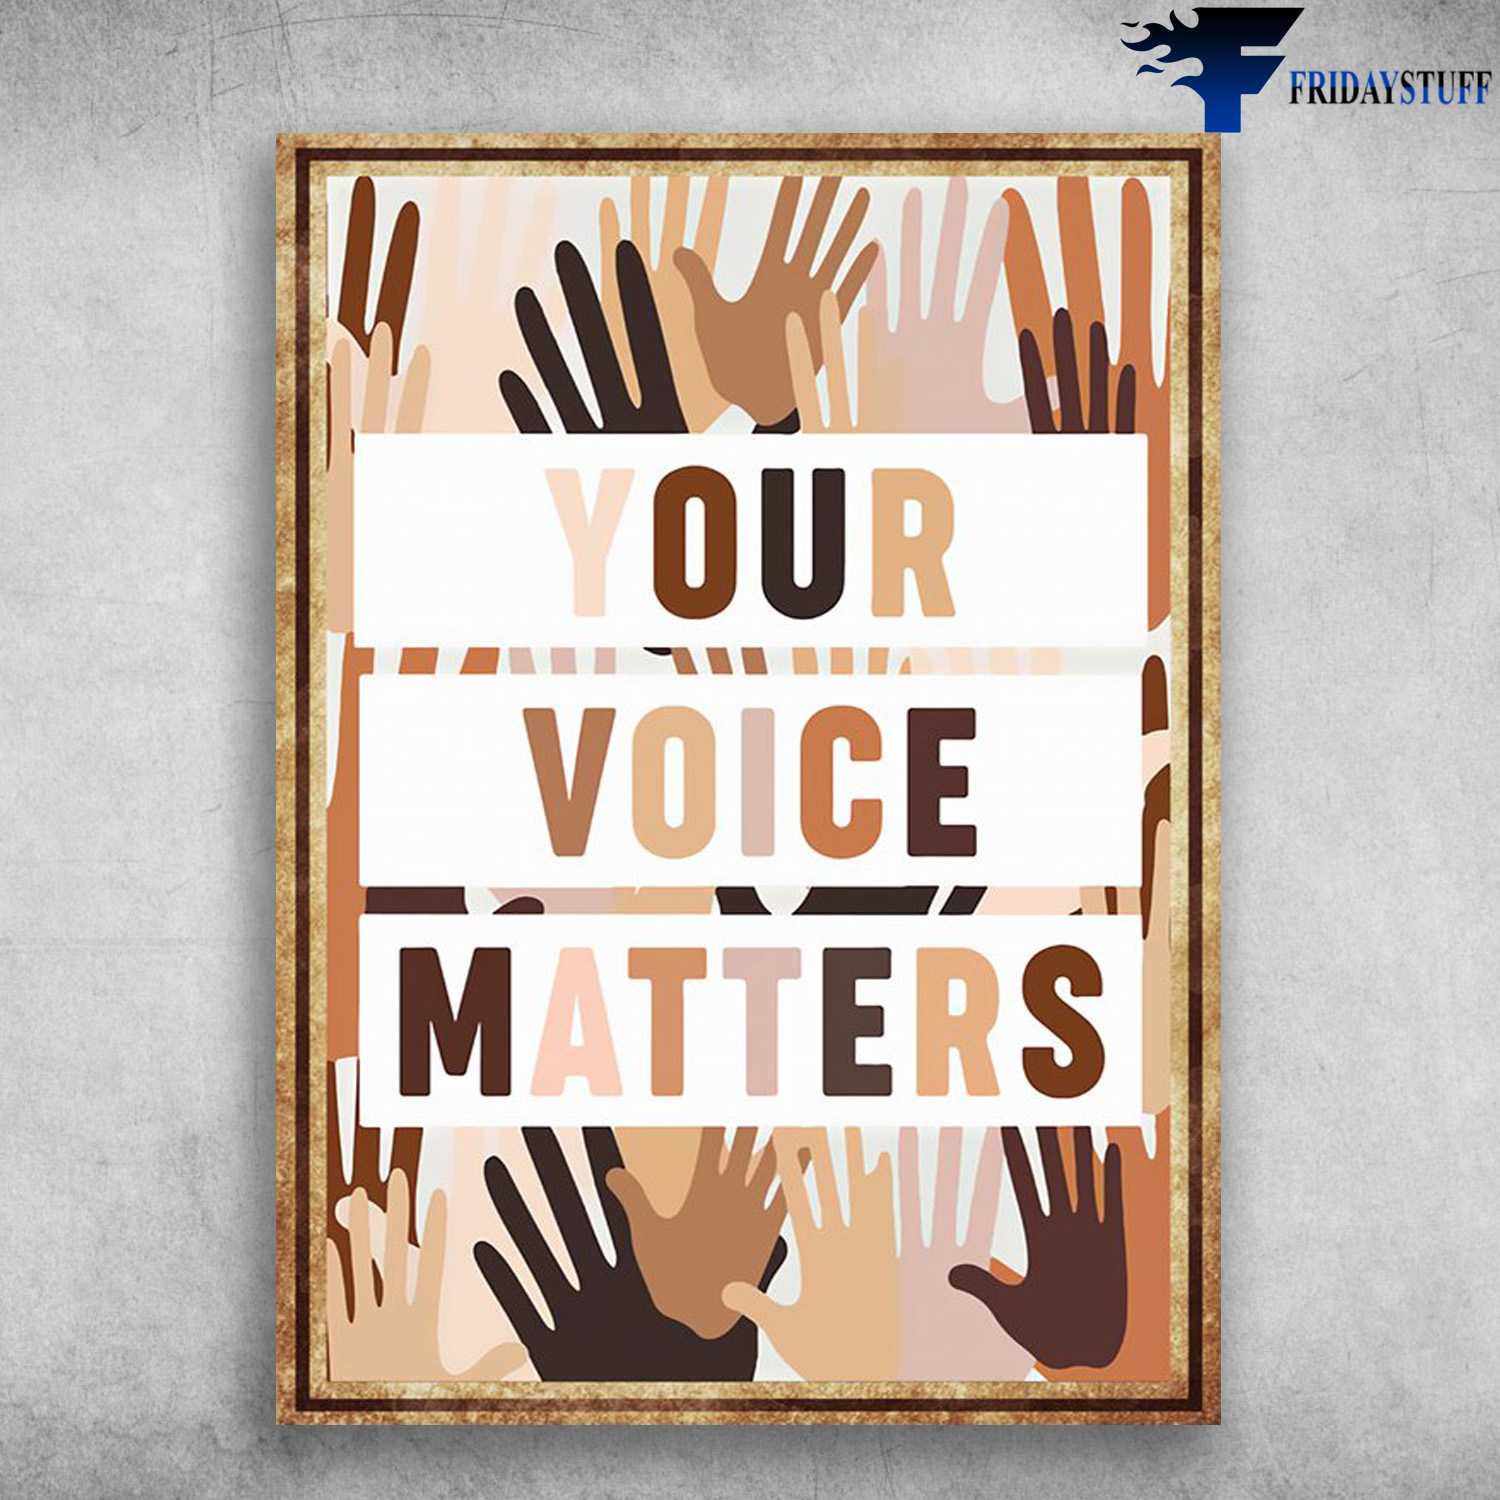 Social Worker - Your Voice Matters